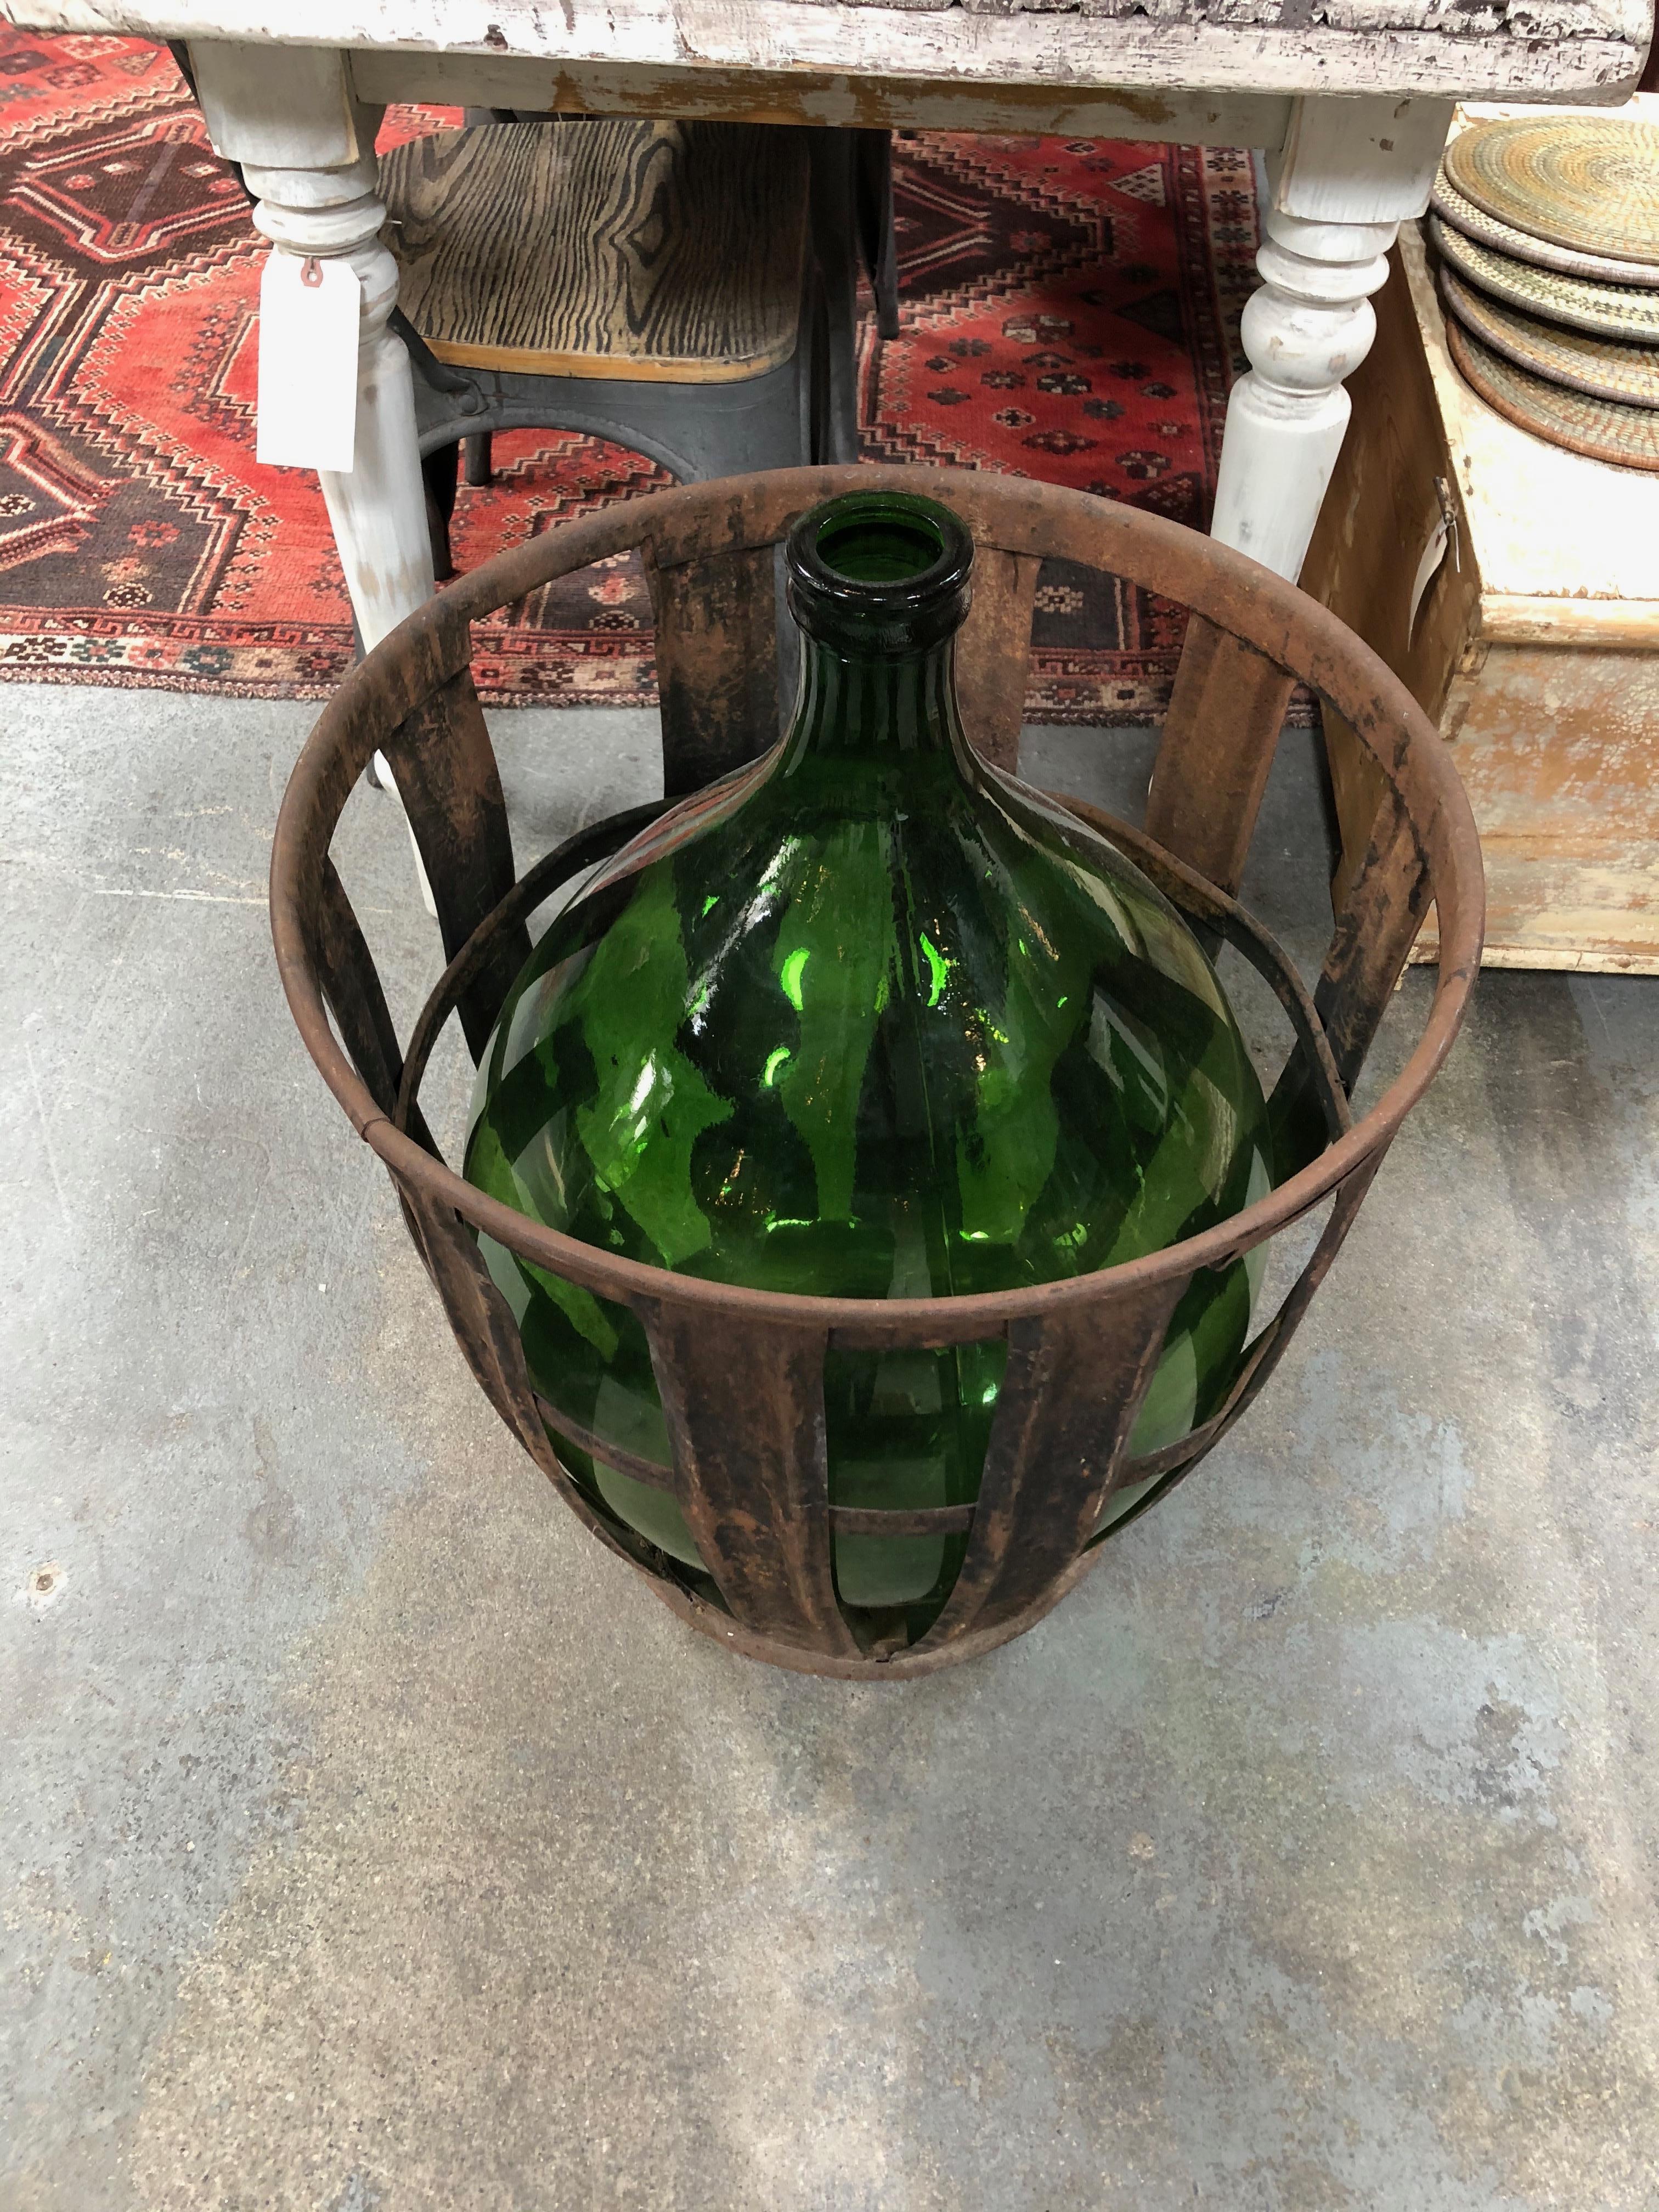 Gorgeous large green glass jug sits perfectly in the metal basket for a classic vintage style.